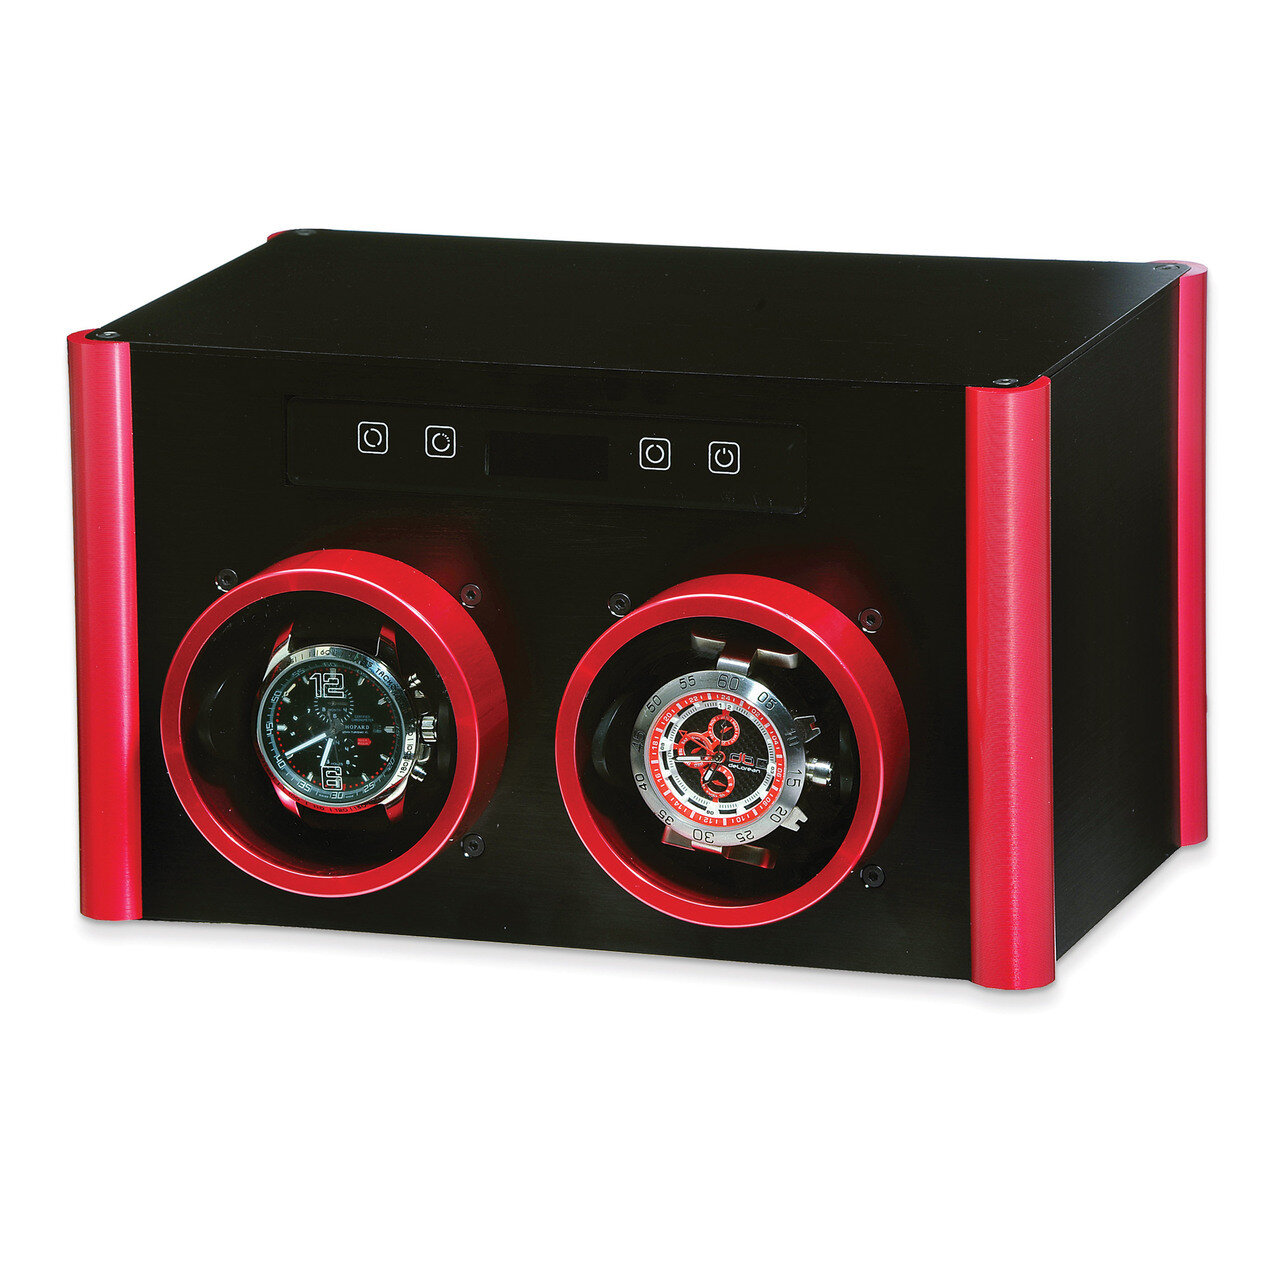 Rotations Black &amp; Red Metal Double Watch Winder GM8467